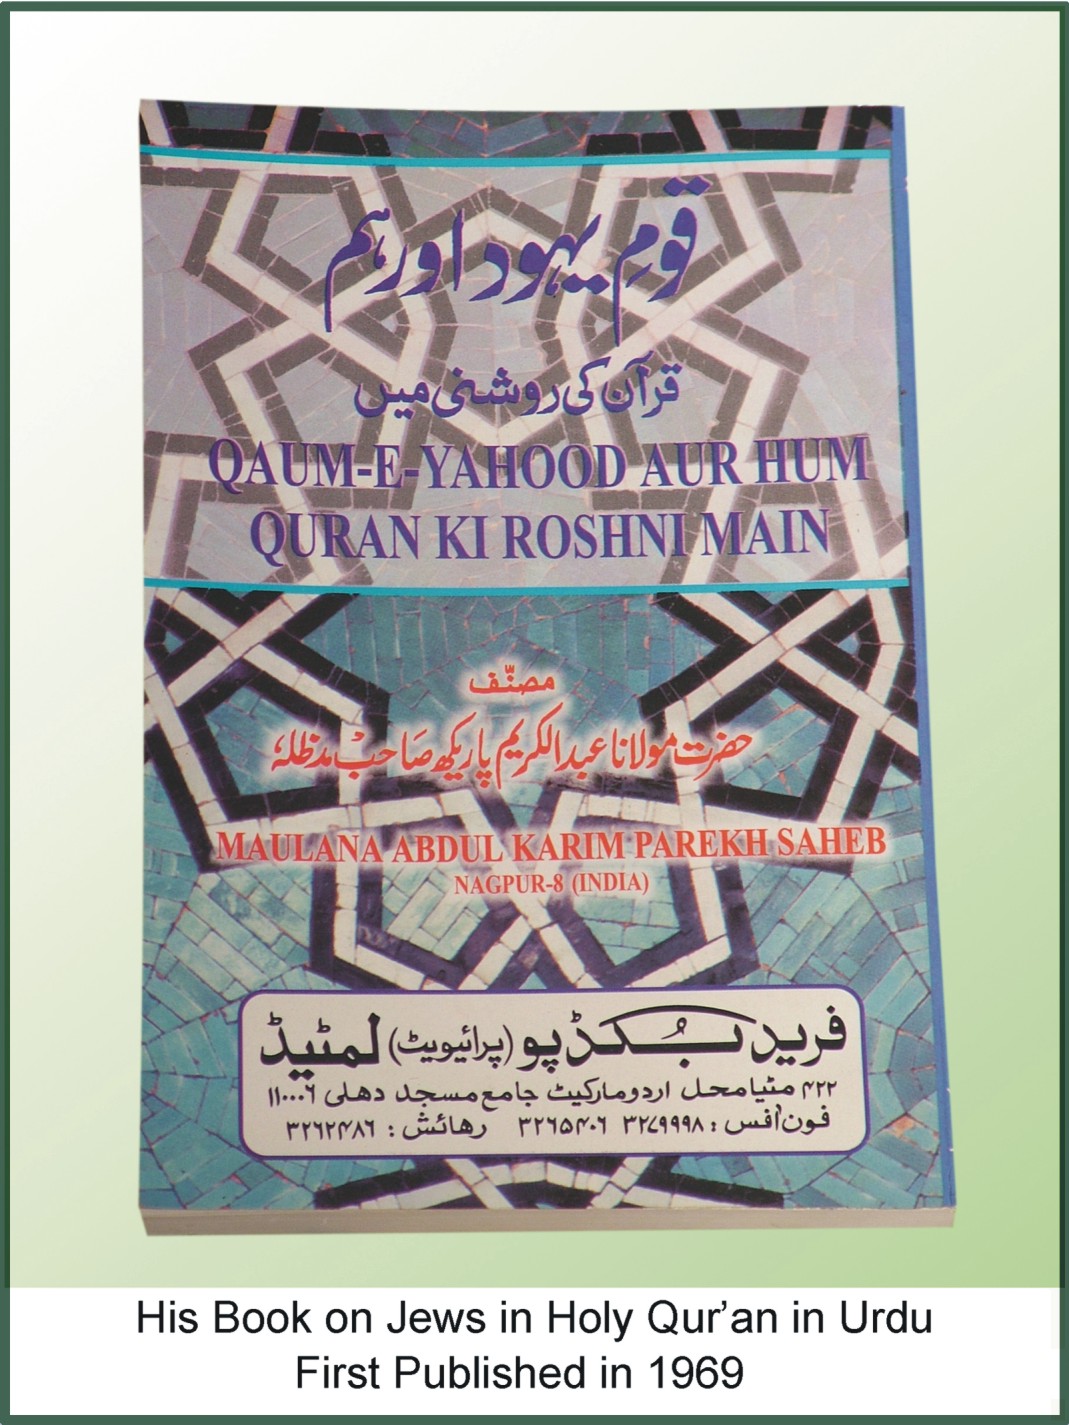 Jews in The Holy Qur'an (Urdu) First Published in 1969